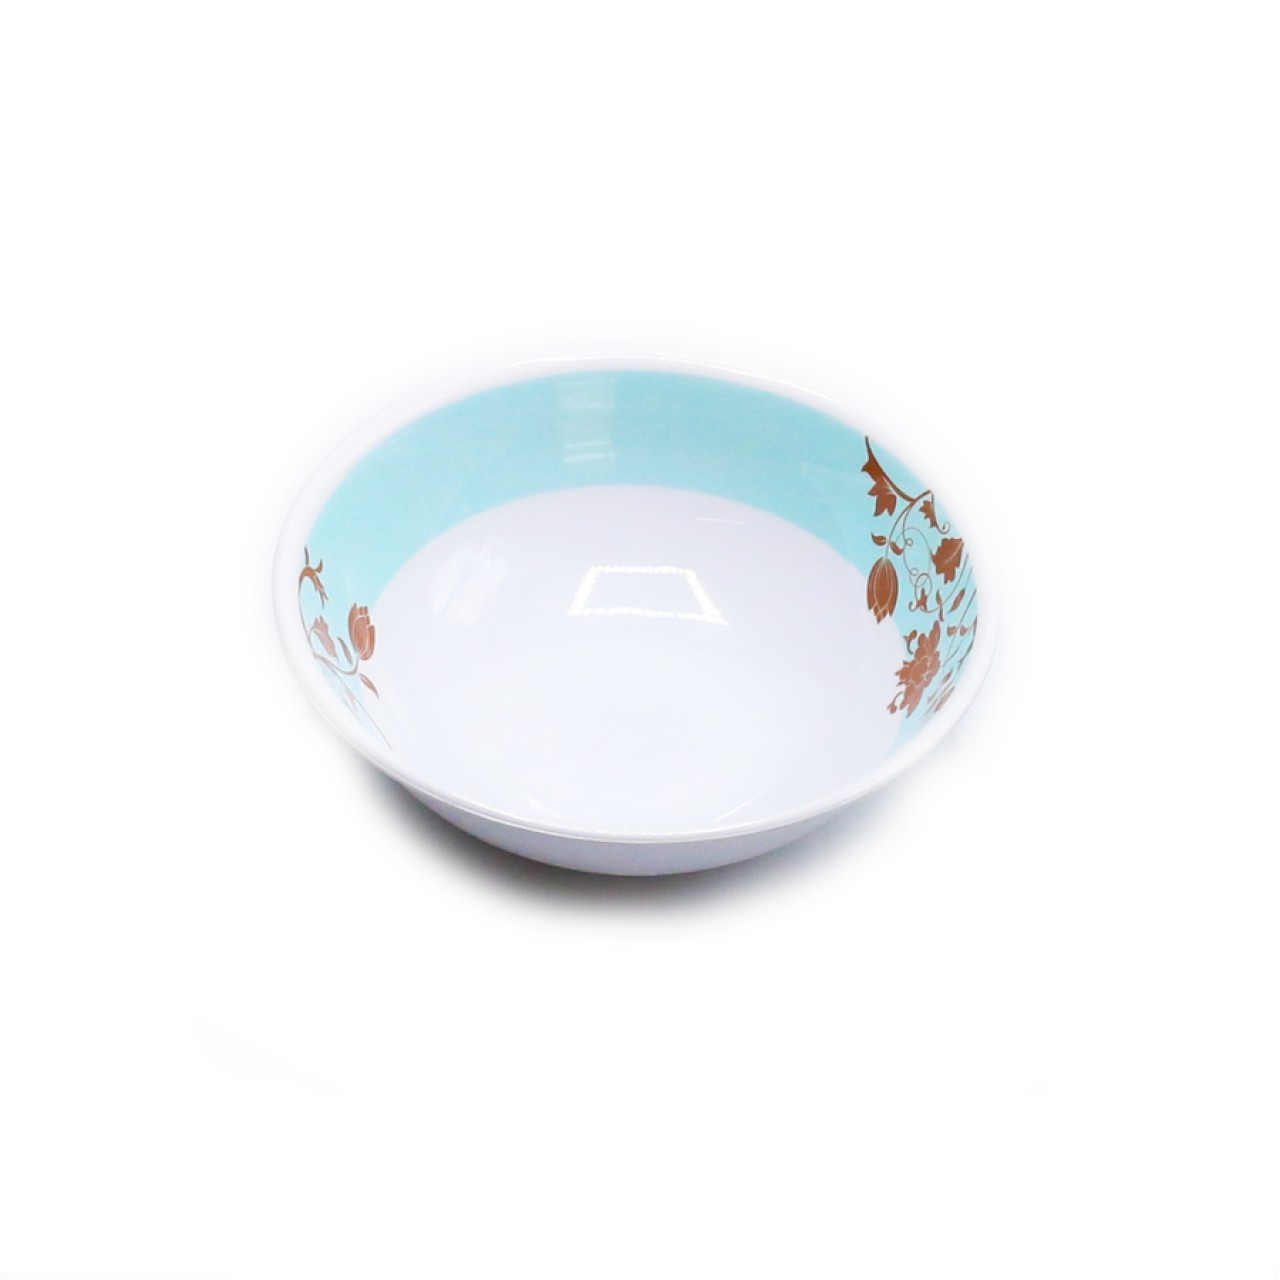 MELAMINEBOWL-PW-AAA-22707-H 7B